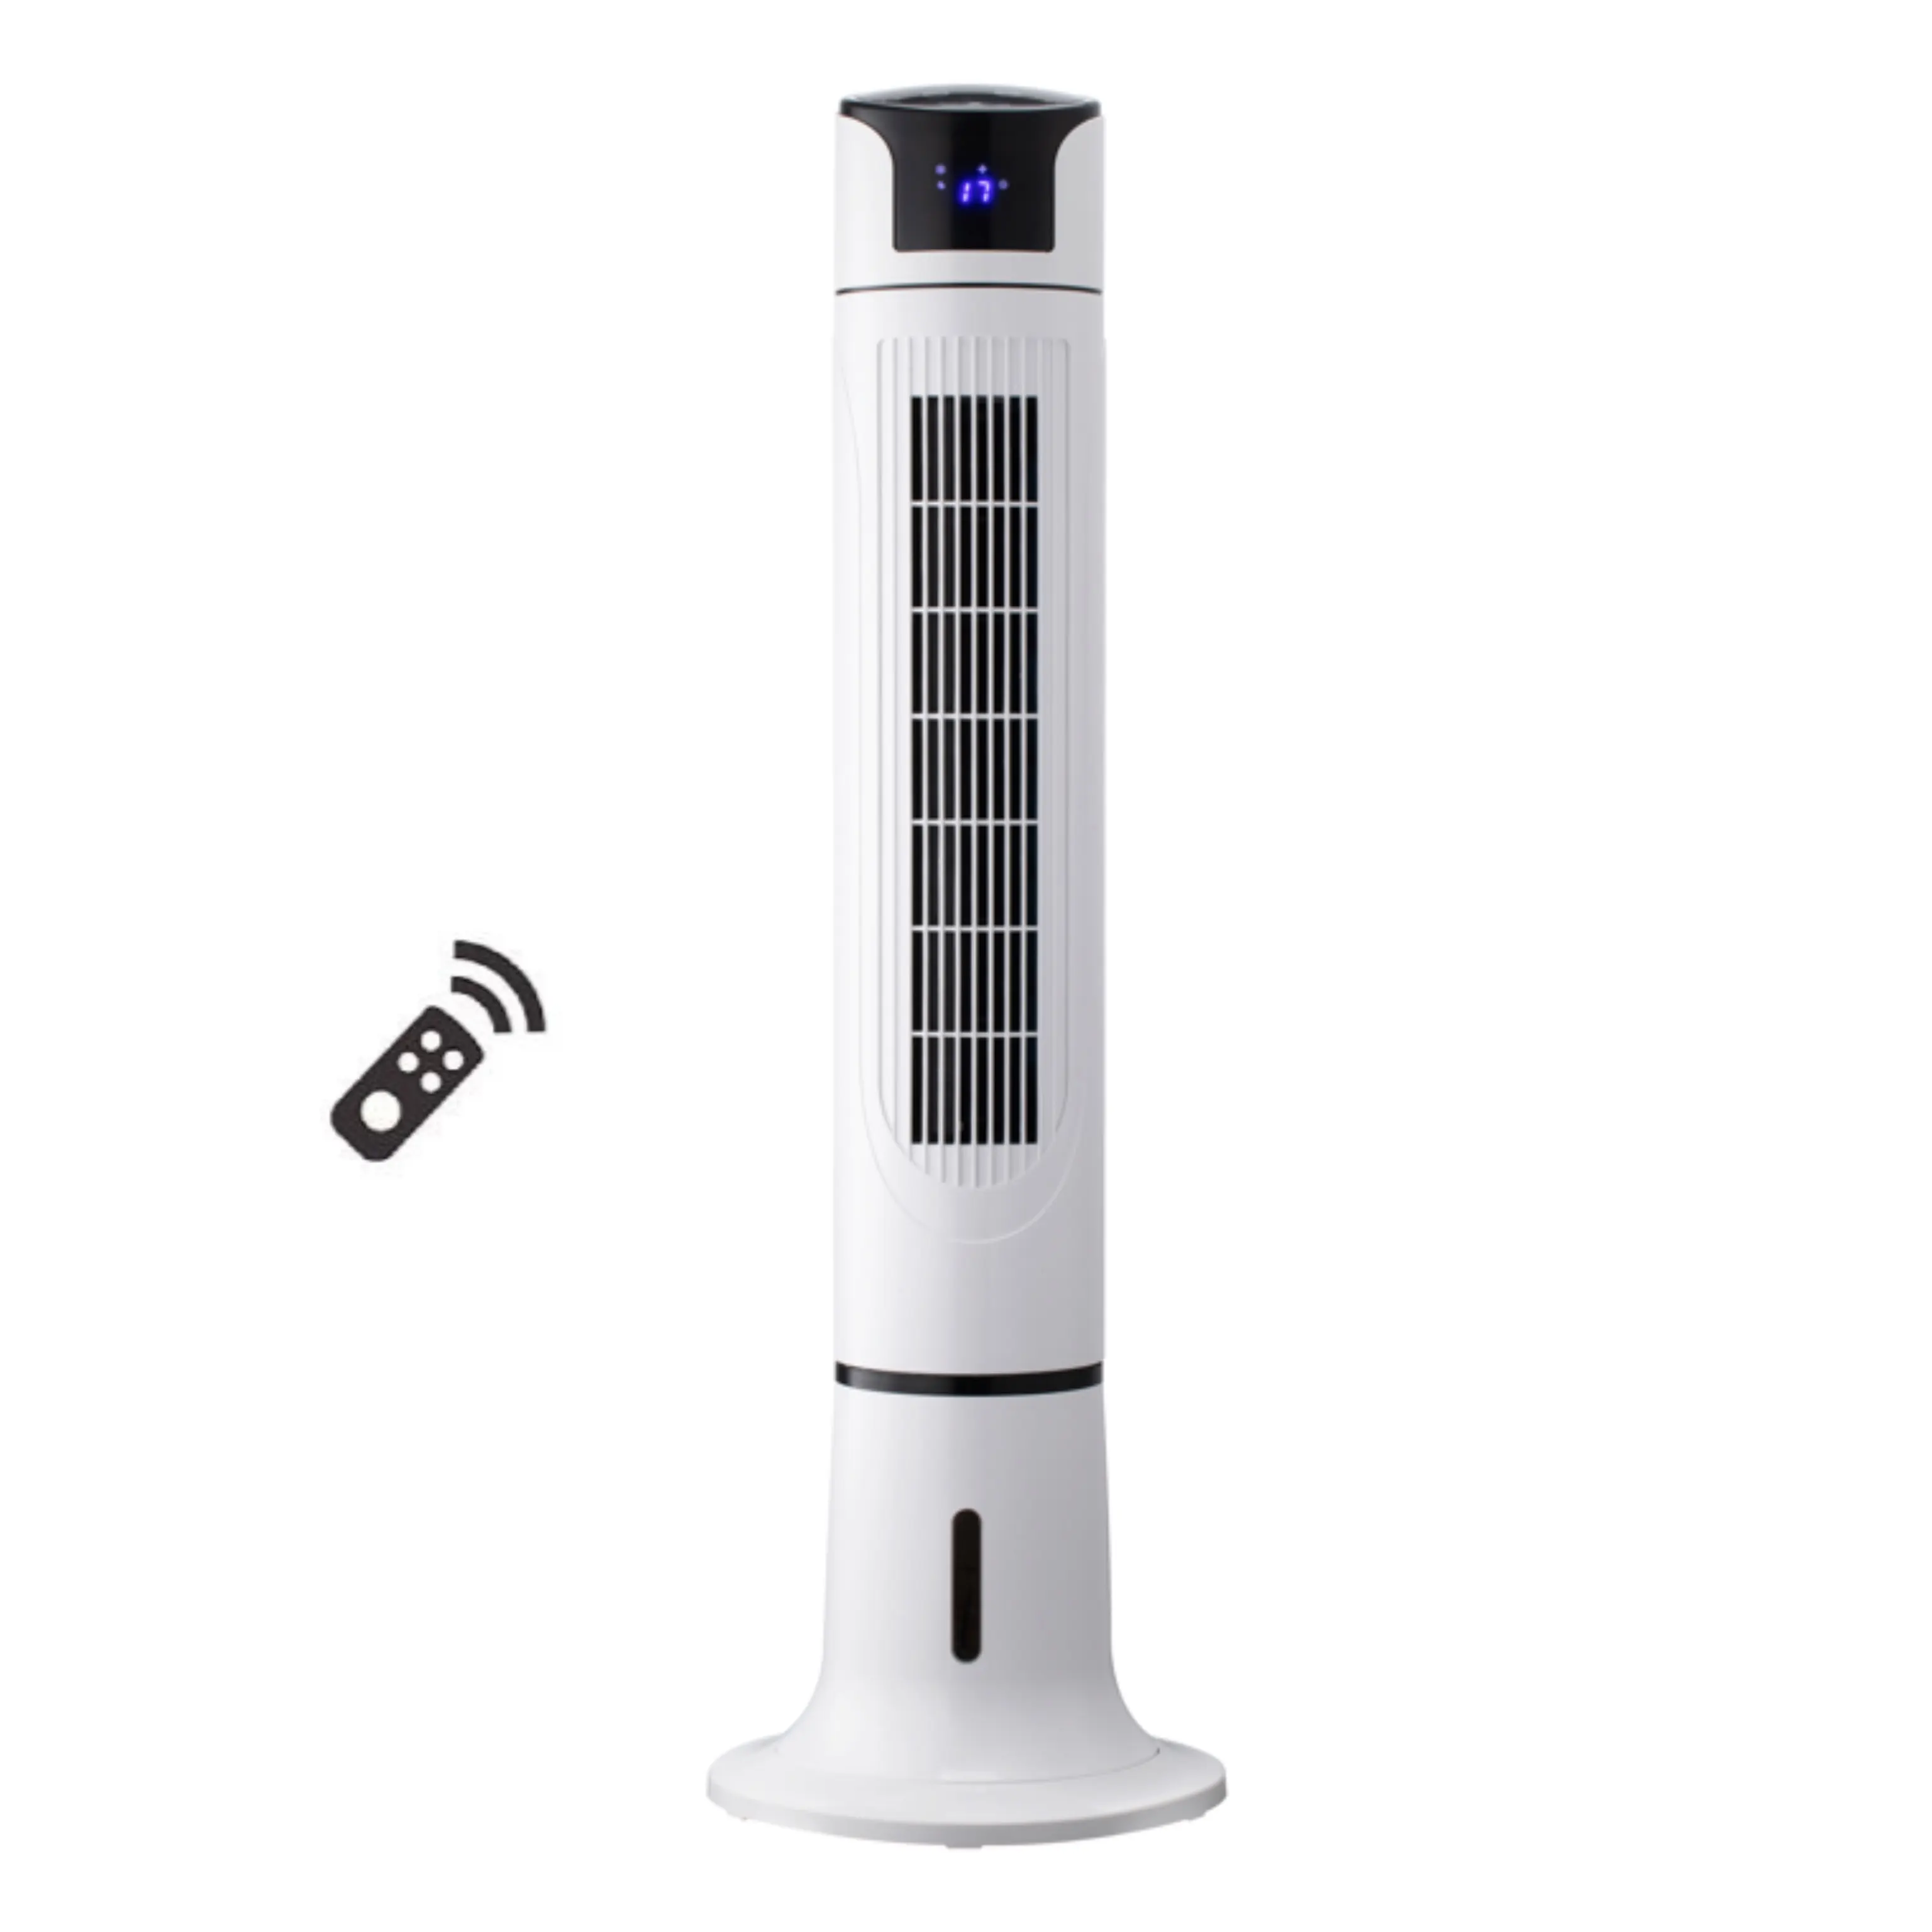 Low noise 4 in 1 stand tower fan cooler Humidify/Purify with 5L water tank/cooling fan